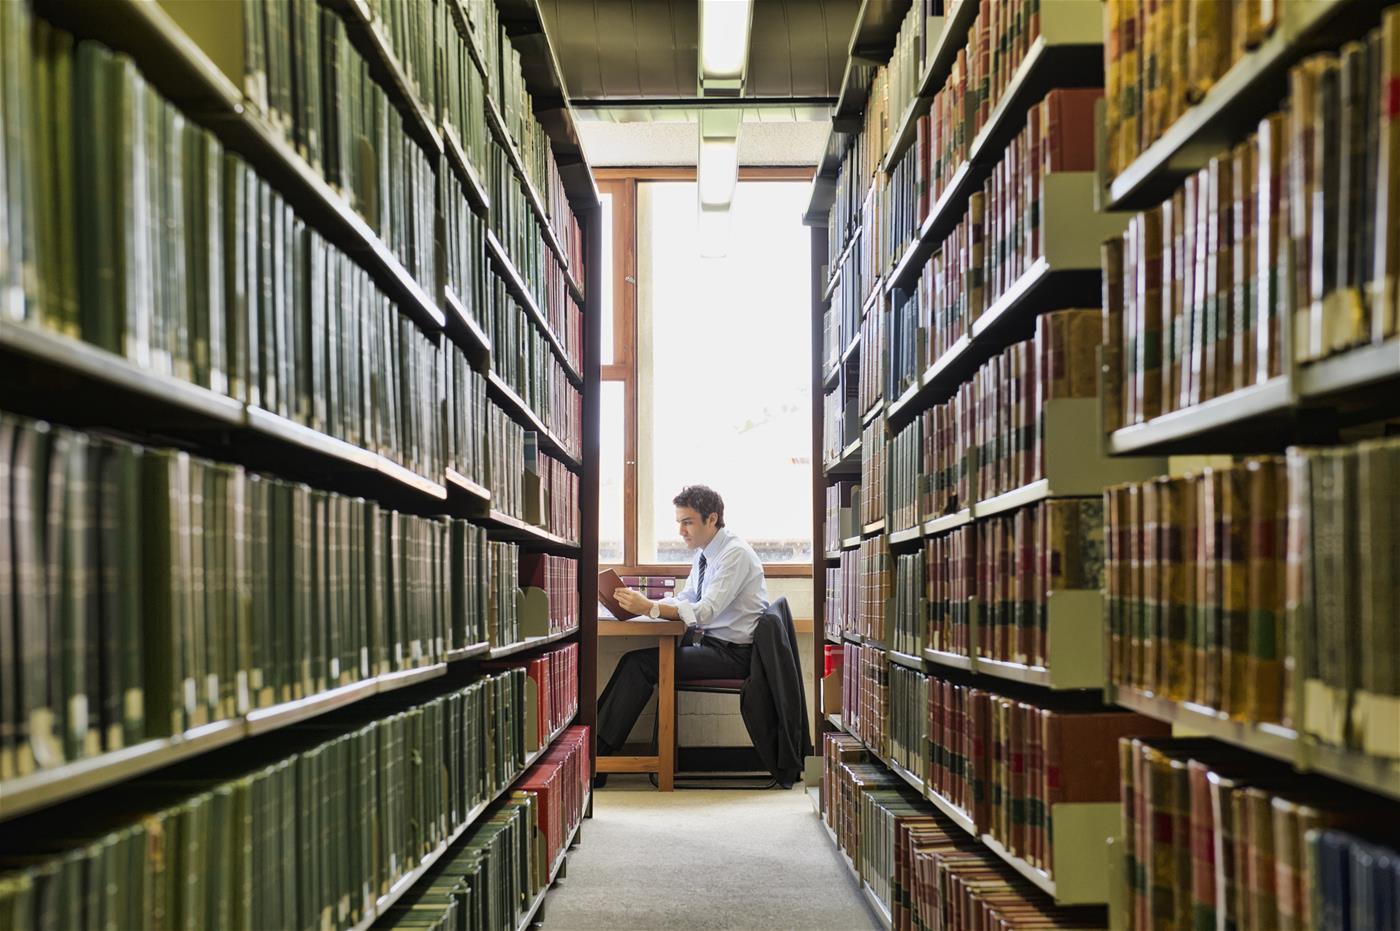 Man sitting in a library